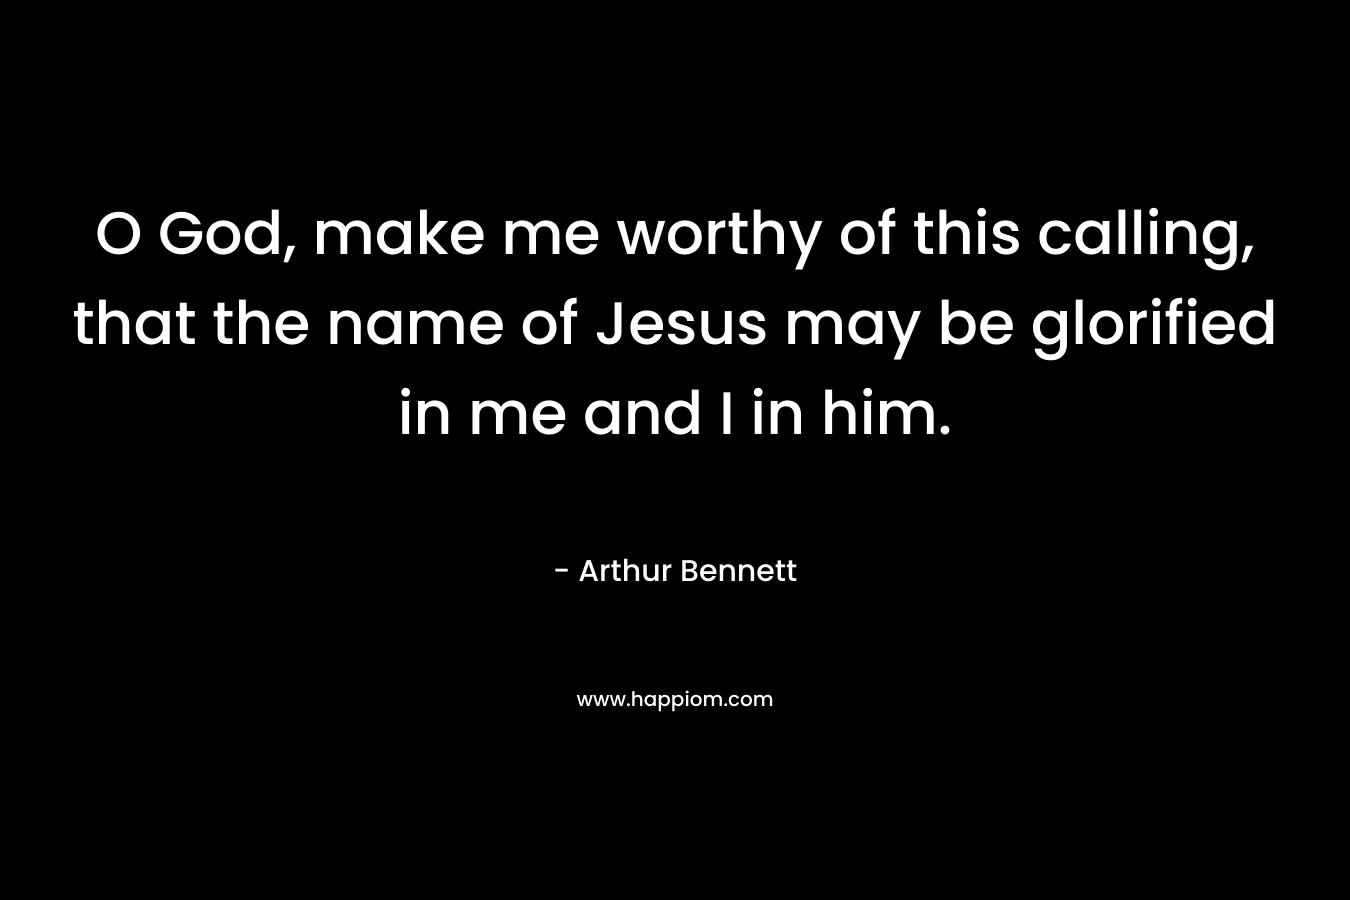 O God, make me worthy of this calling, that the name of Jesus may be glorified in me and I in him.